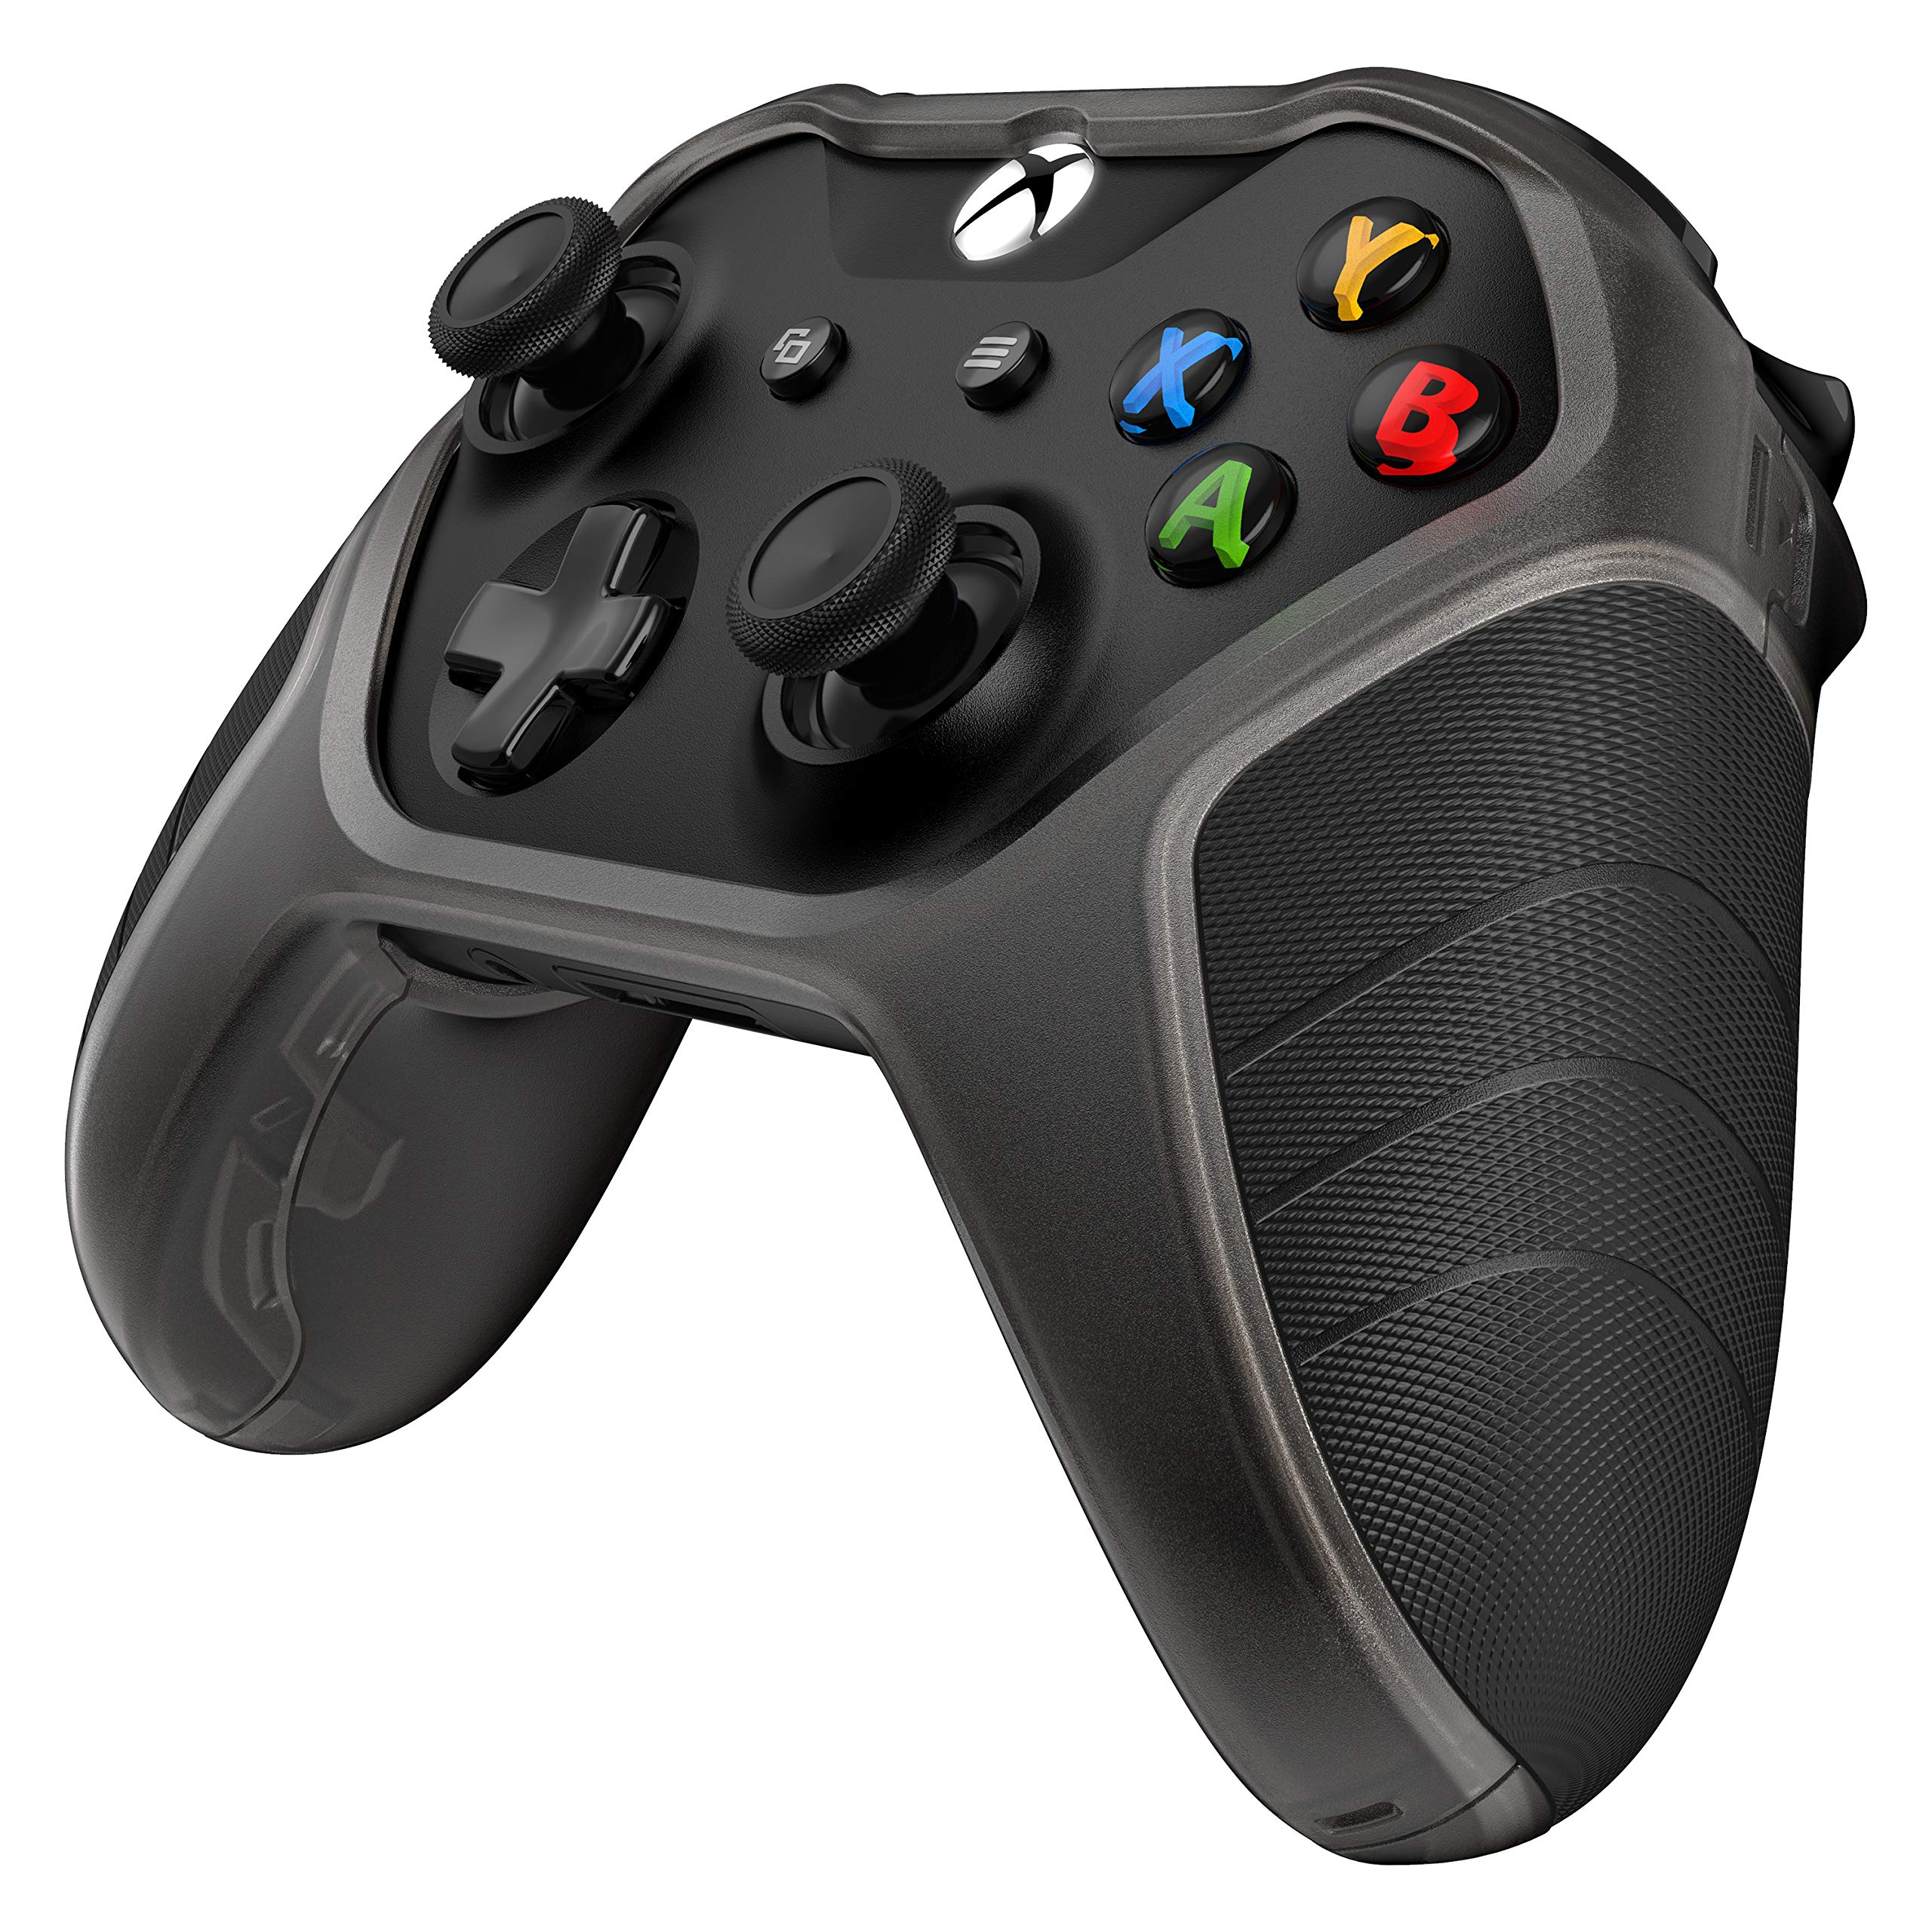 EASY GRIP GAMING CONTROLLER